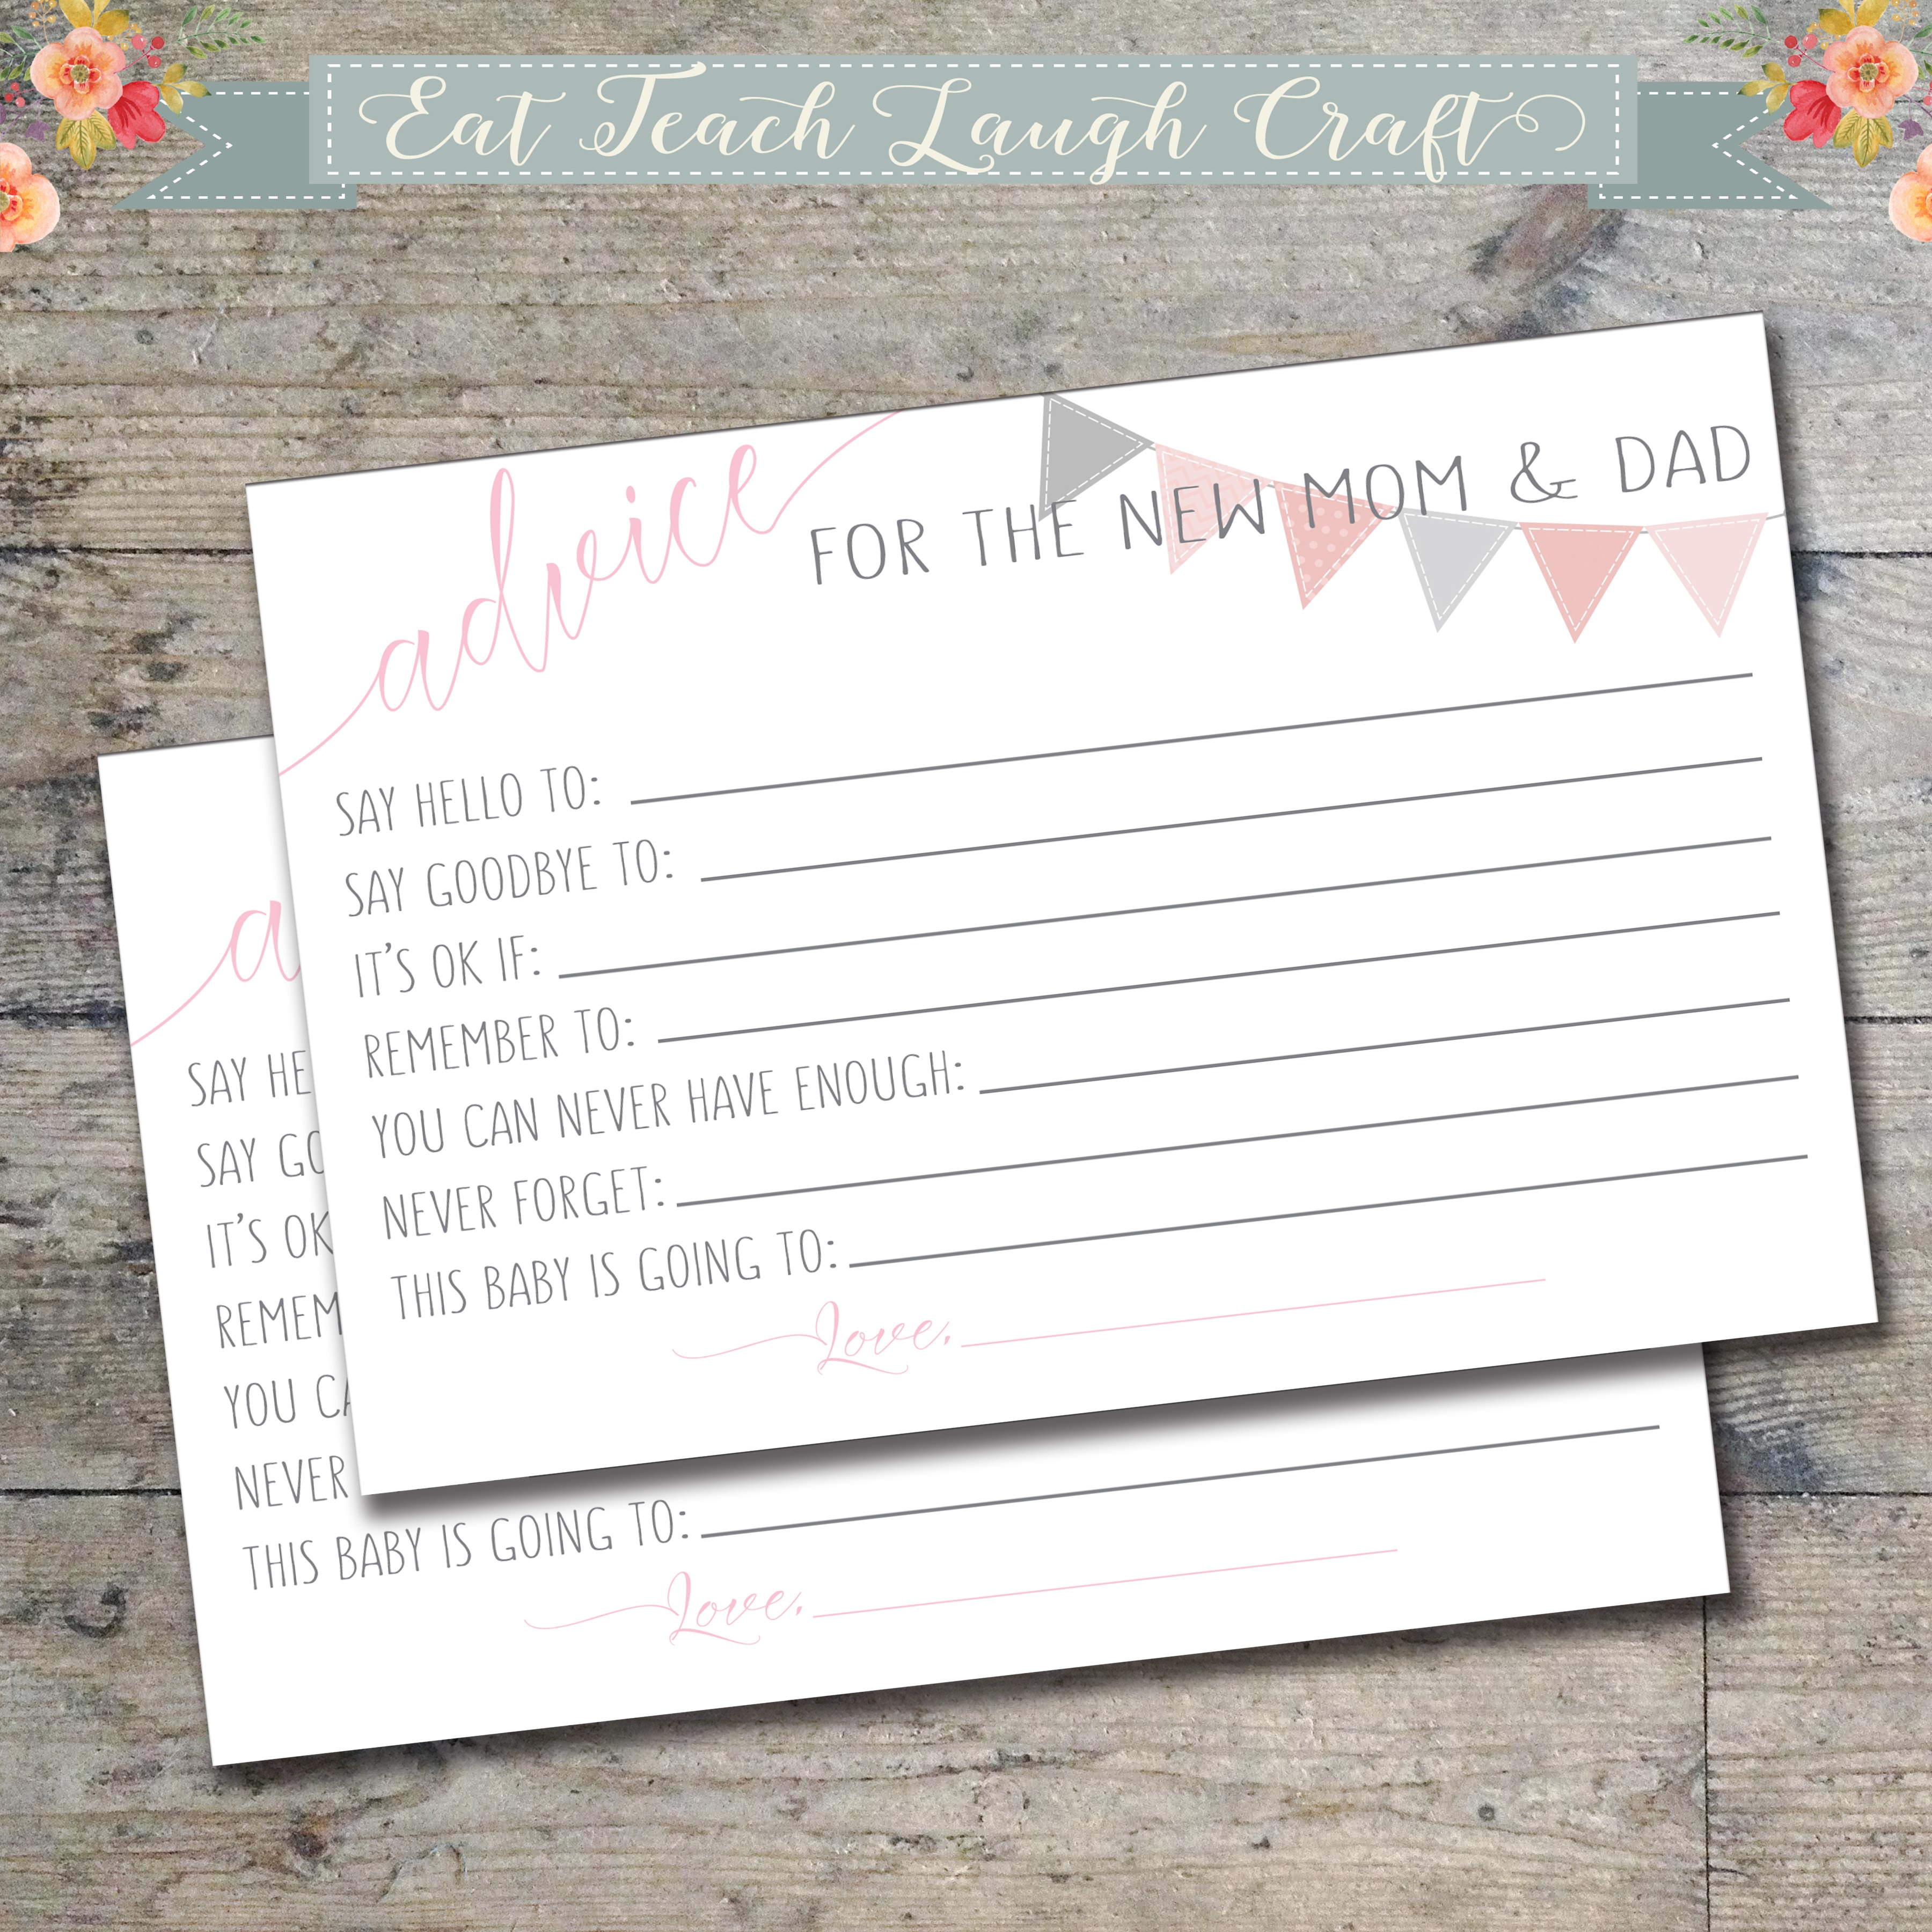 Advice For The New Mom And Dad: Baby Shower Album - Eat Teach Laugh - Mommy Advice Cards Free Printable